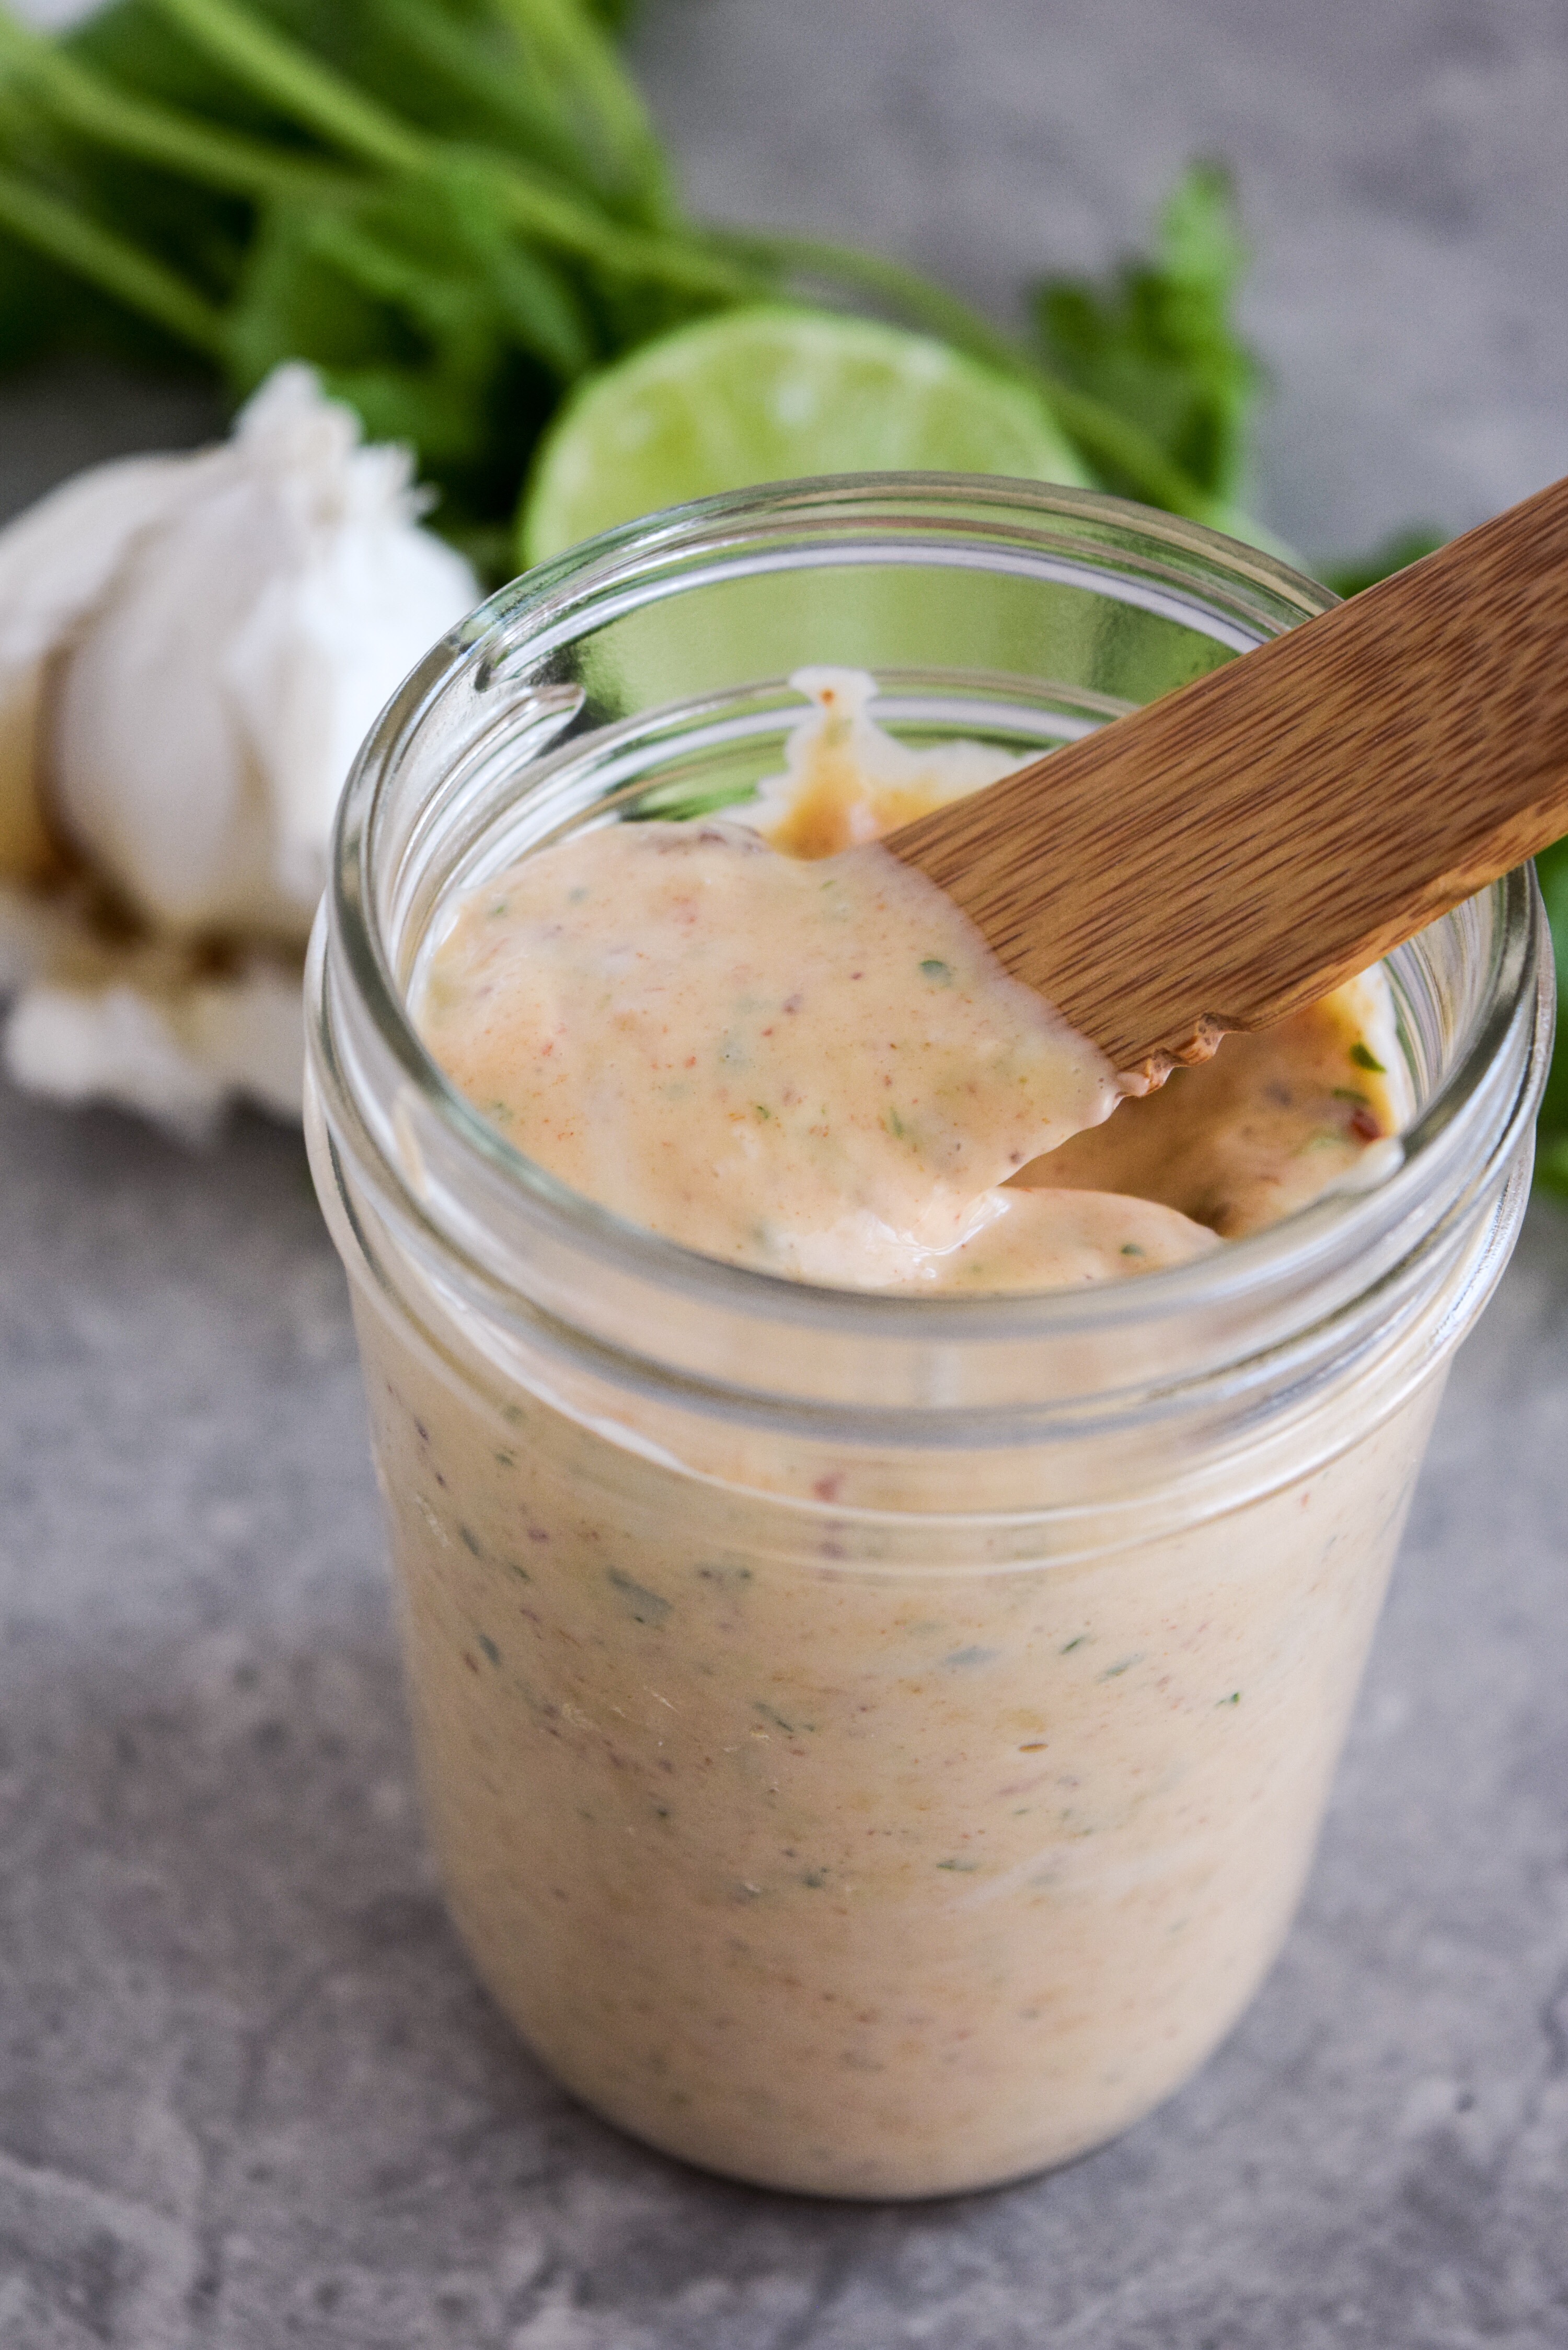 5-Minute Creamy Chipotle Mayo (Whole30 Approved) - A Simplified Life